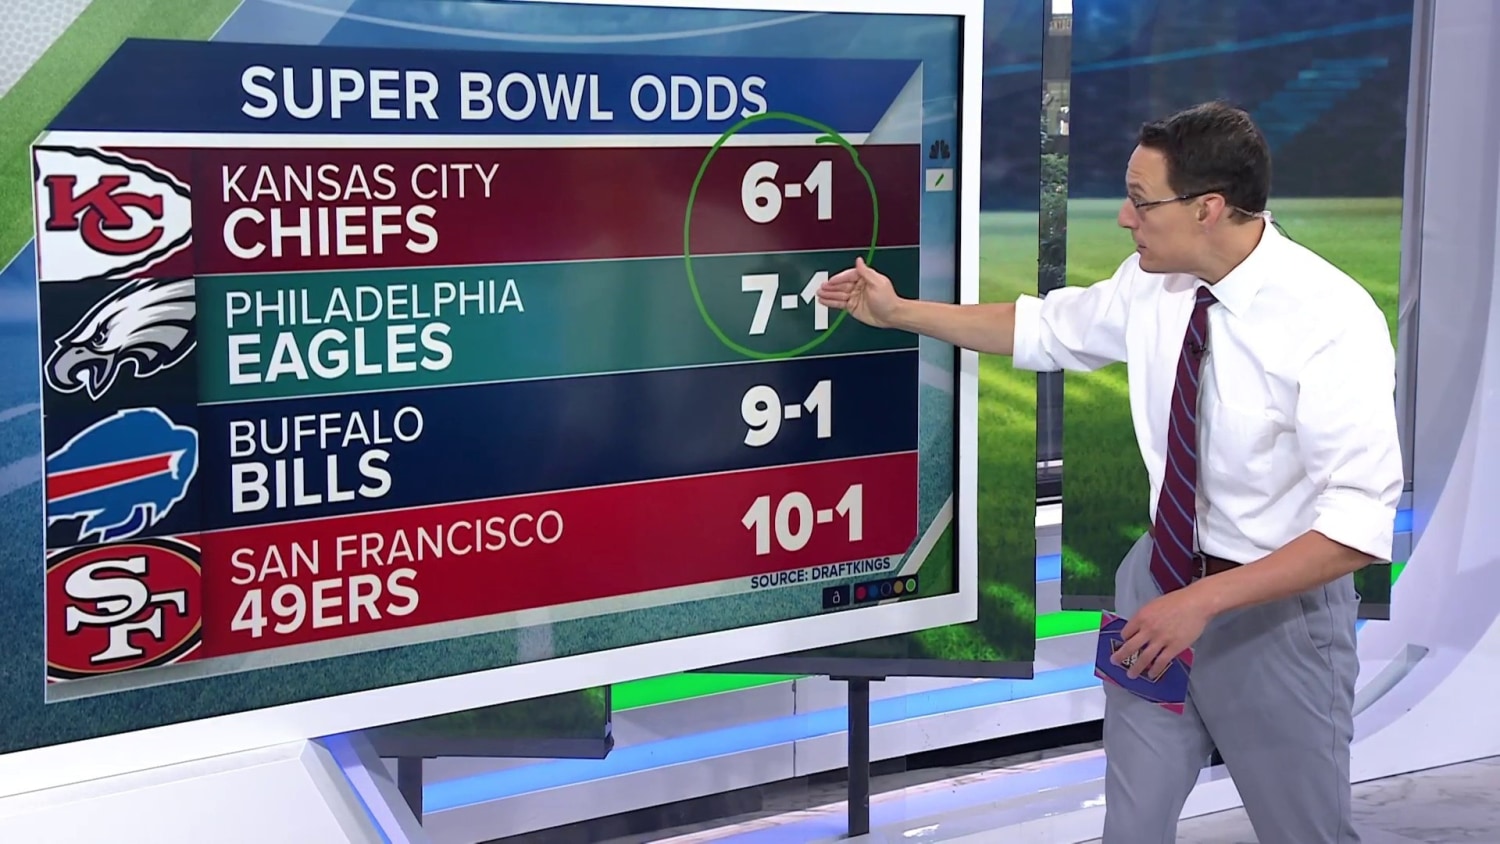 These NFL teams have the best Super Bowl odds going into the new season